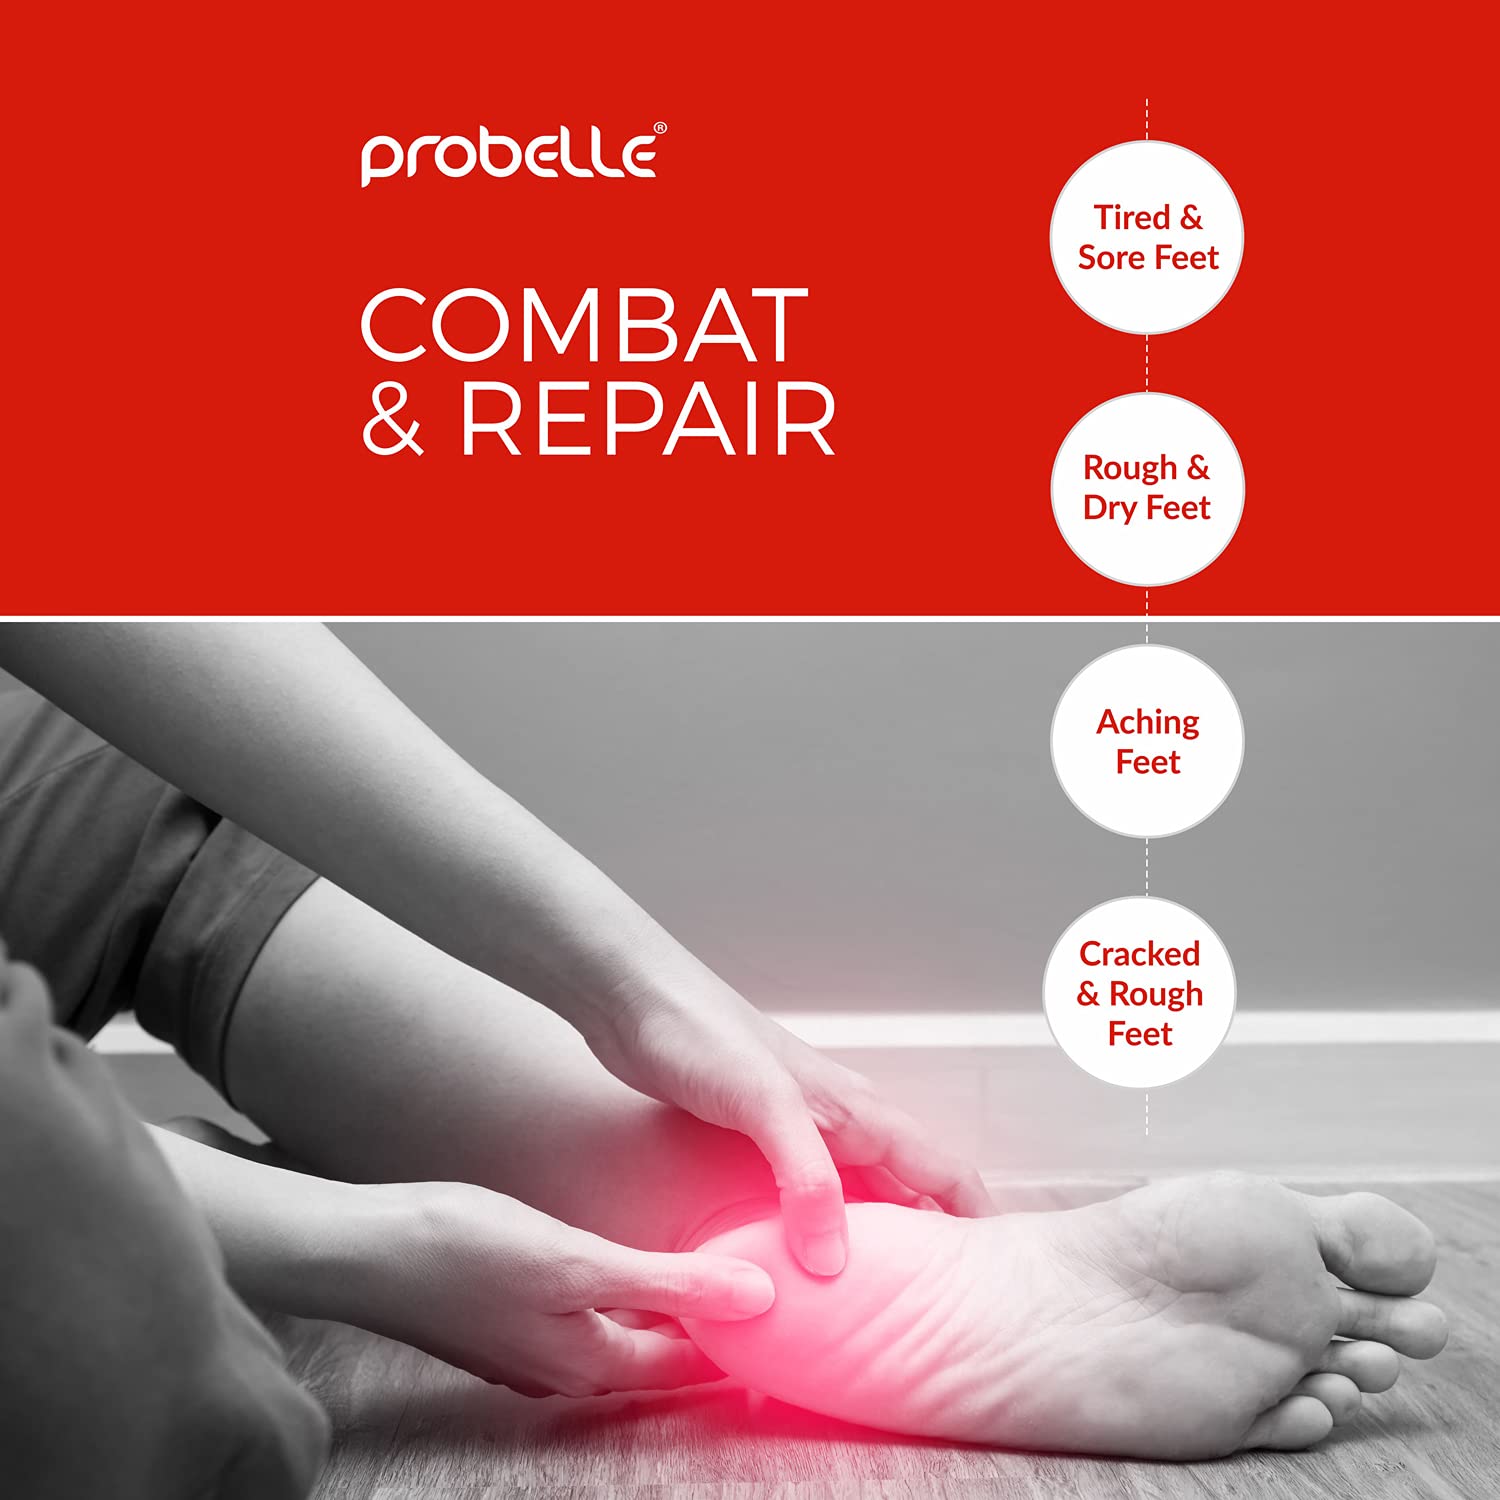 Probelle Advanced Total Foot Cream: Soothes, Hydrates, Rejuvenates Skin For Rough, Dry, Cracked & Sore Feet, 3 Ounces